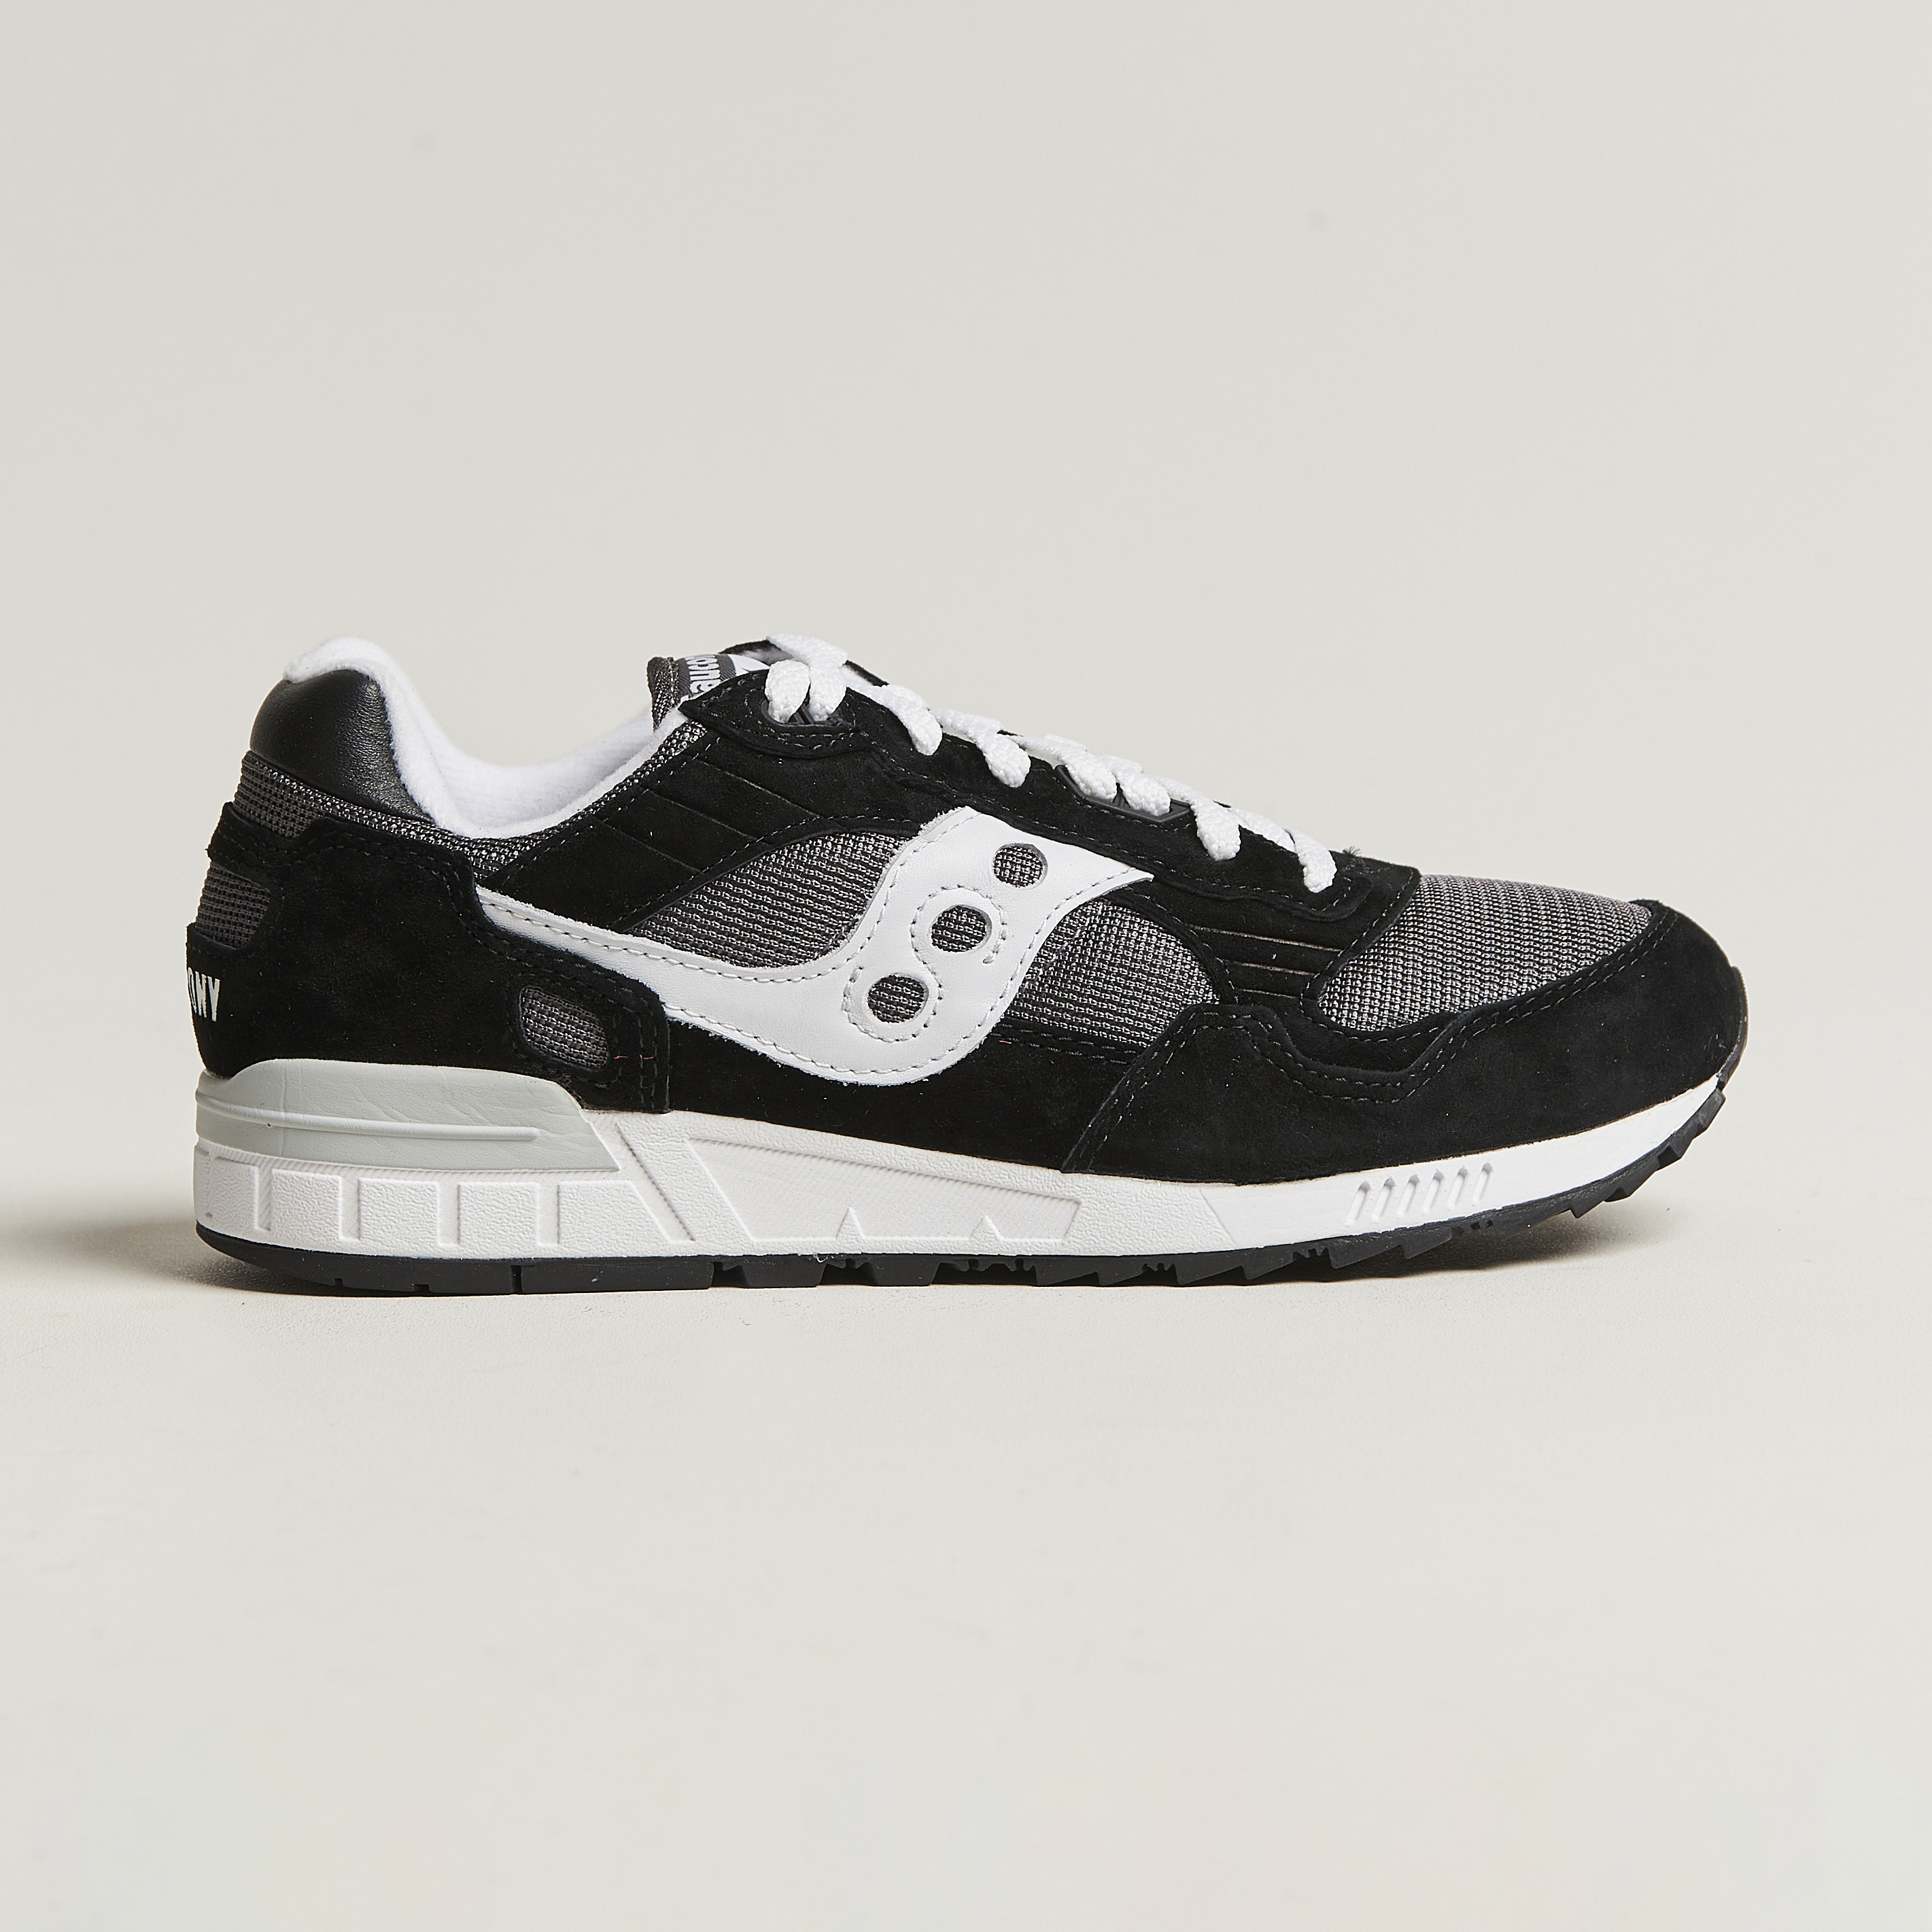 Saucony Shadow 5000 Sneaker Charcoal/White at CareOfCarl.com